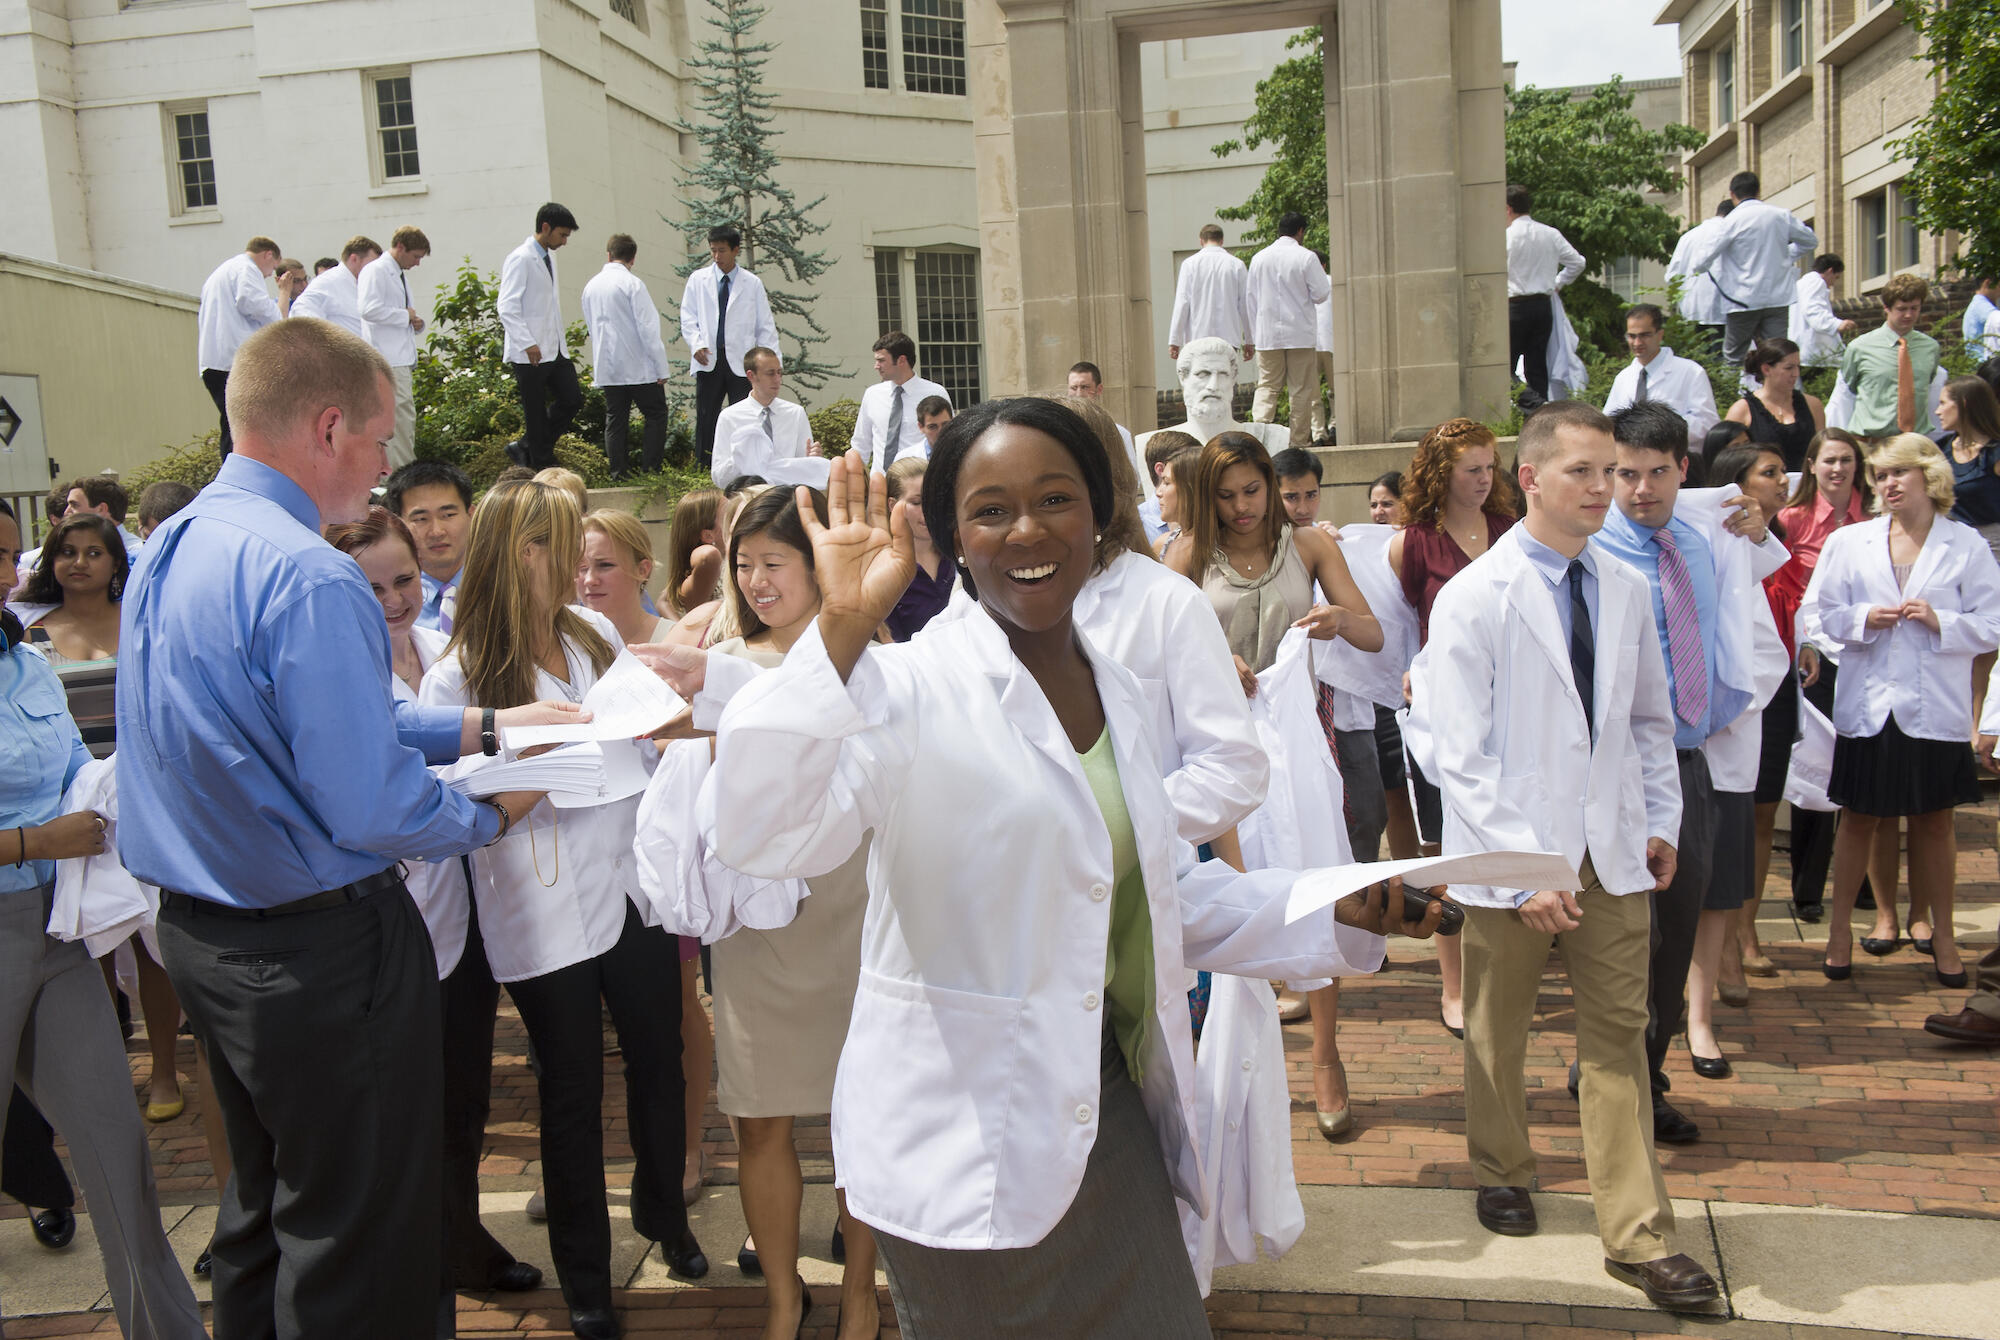 First-year medical students don white coats during a ceremony held at the start of the school year. (Photo by Allen Jones, University Relations)